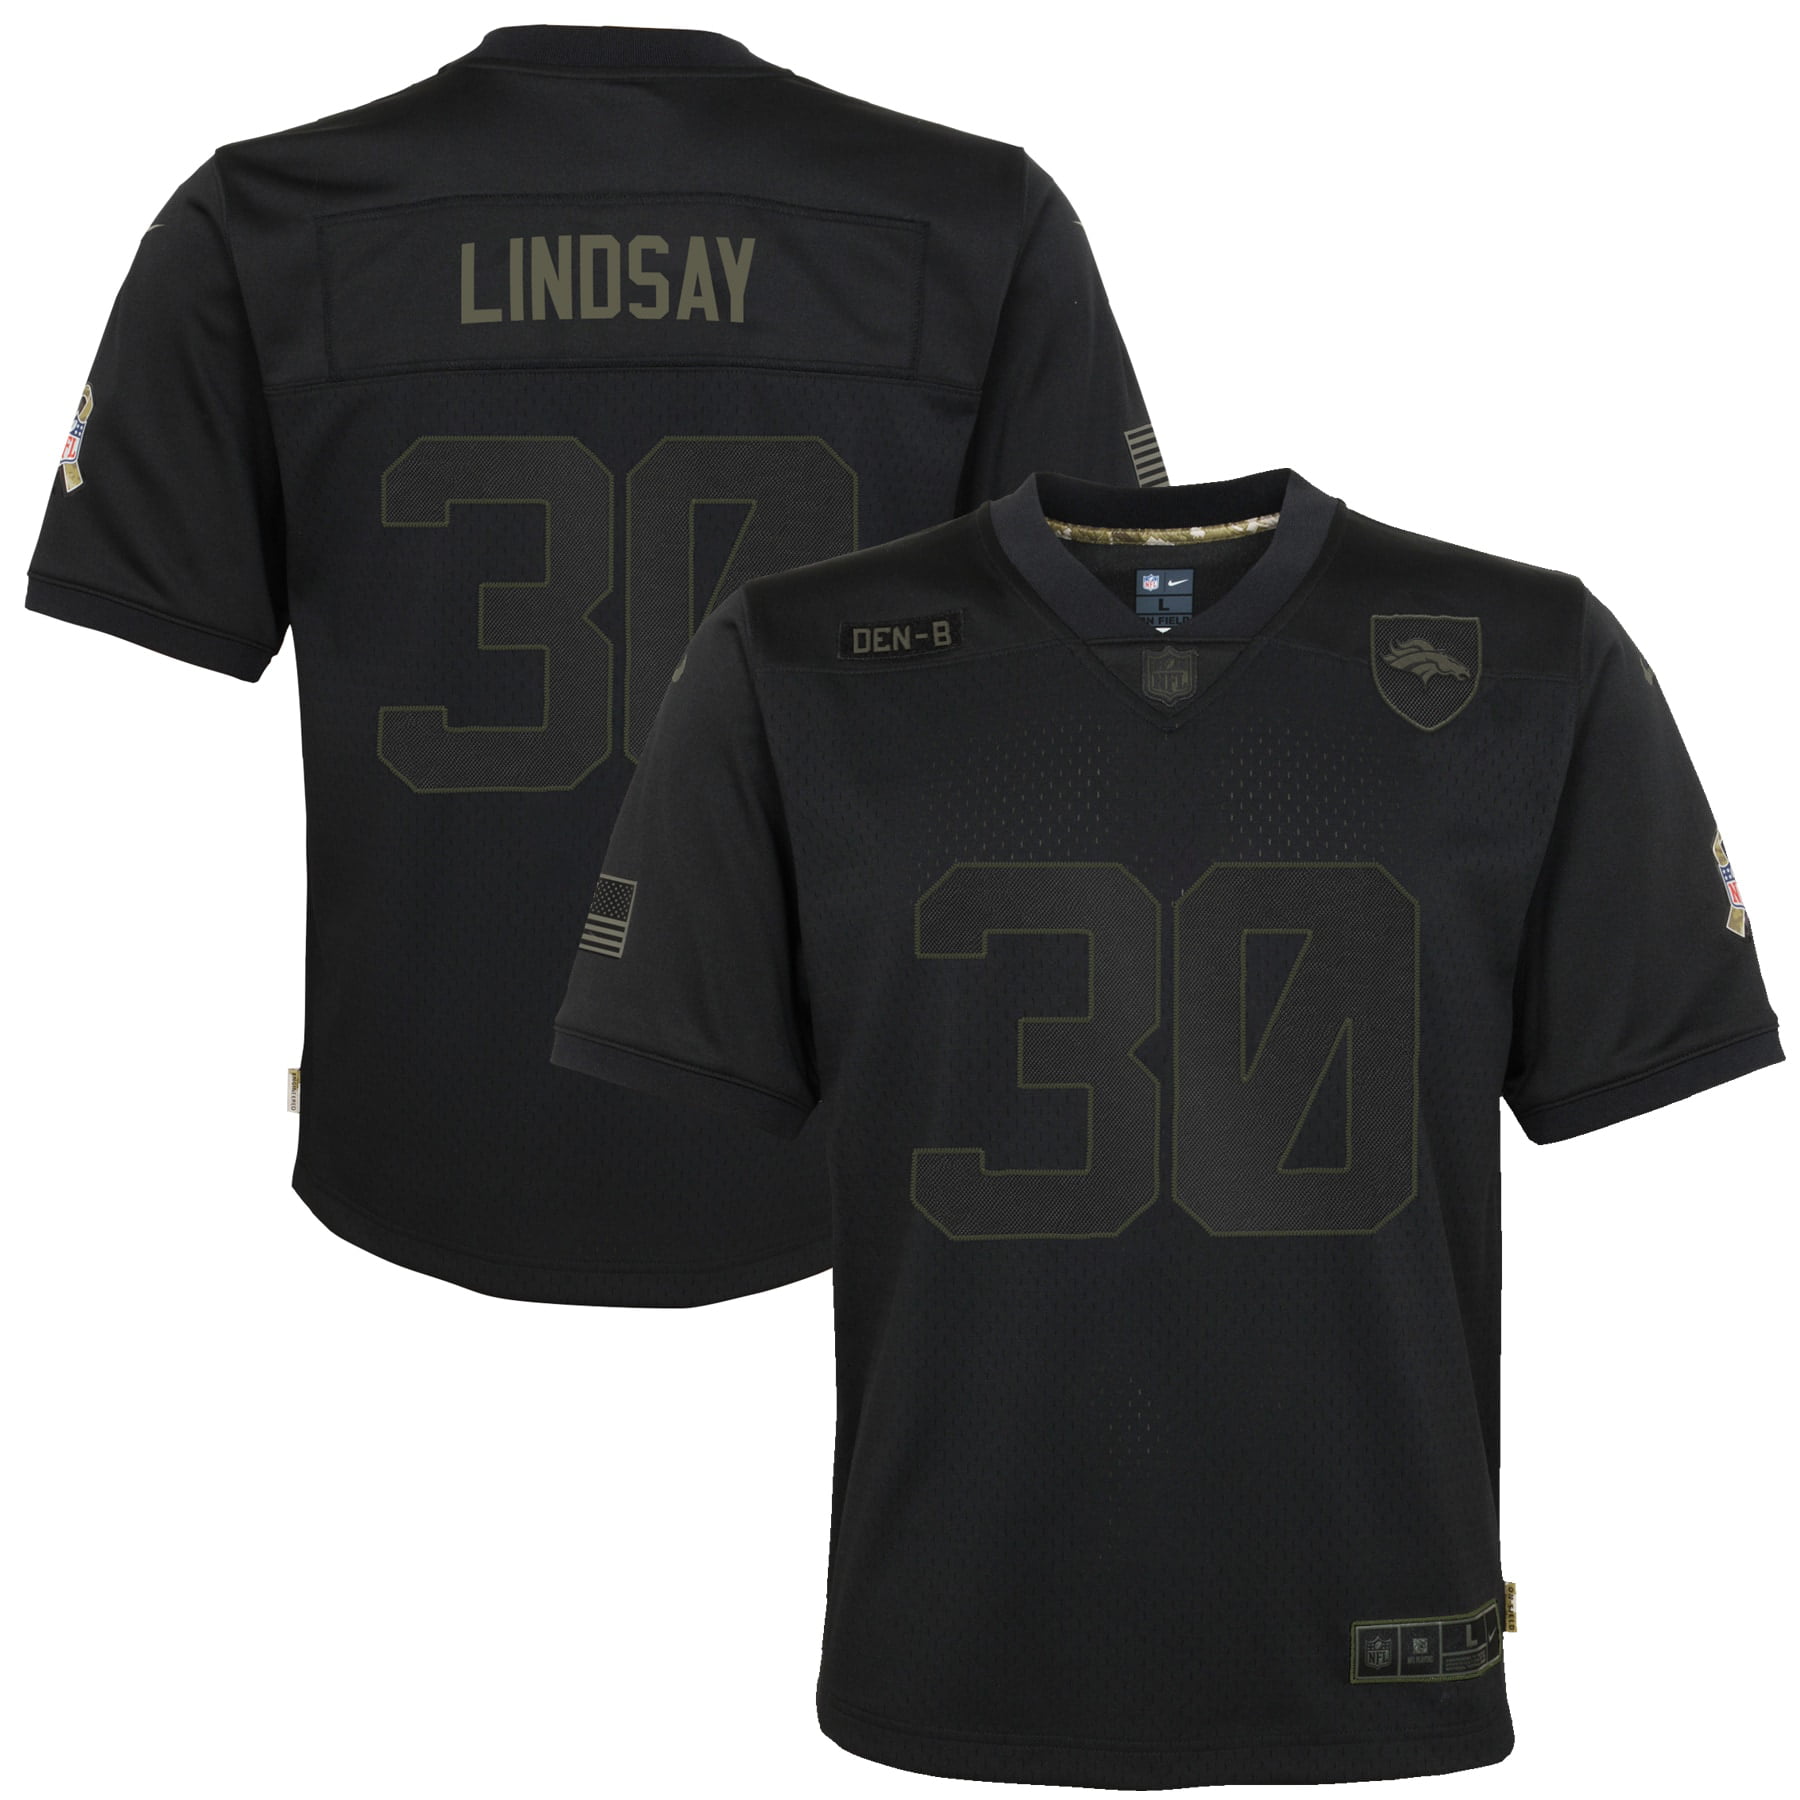 phillip lindsay youth jersey